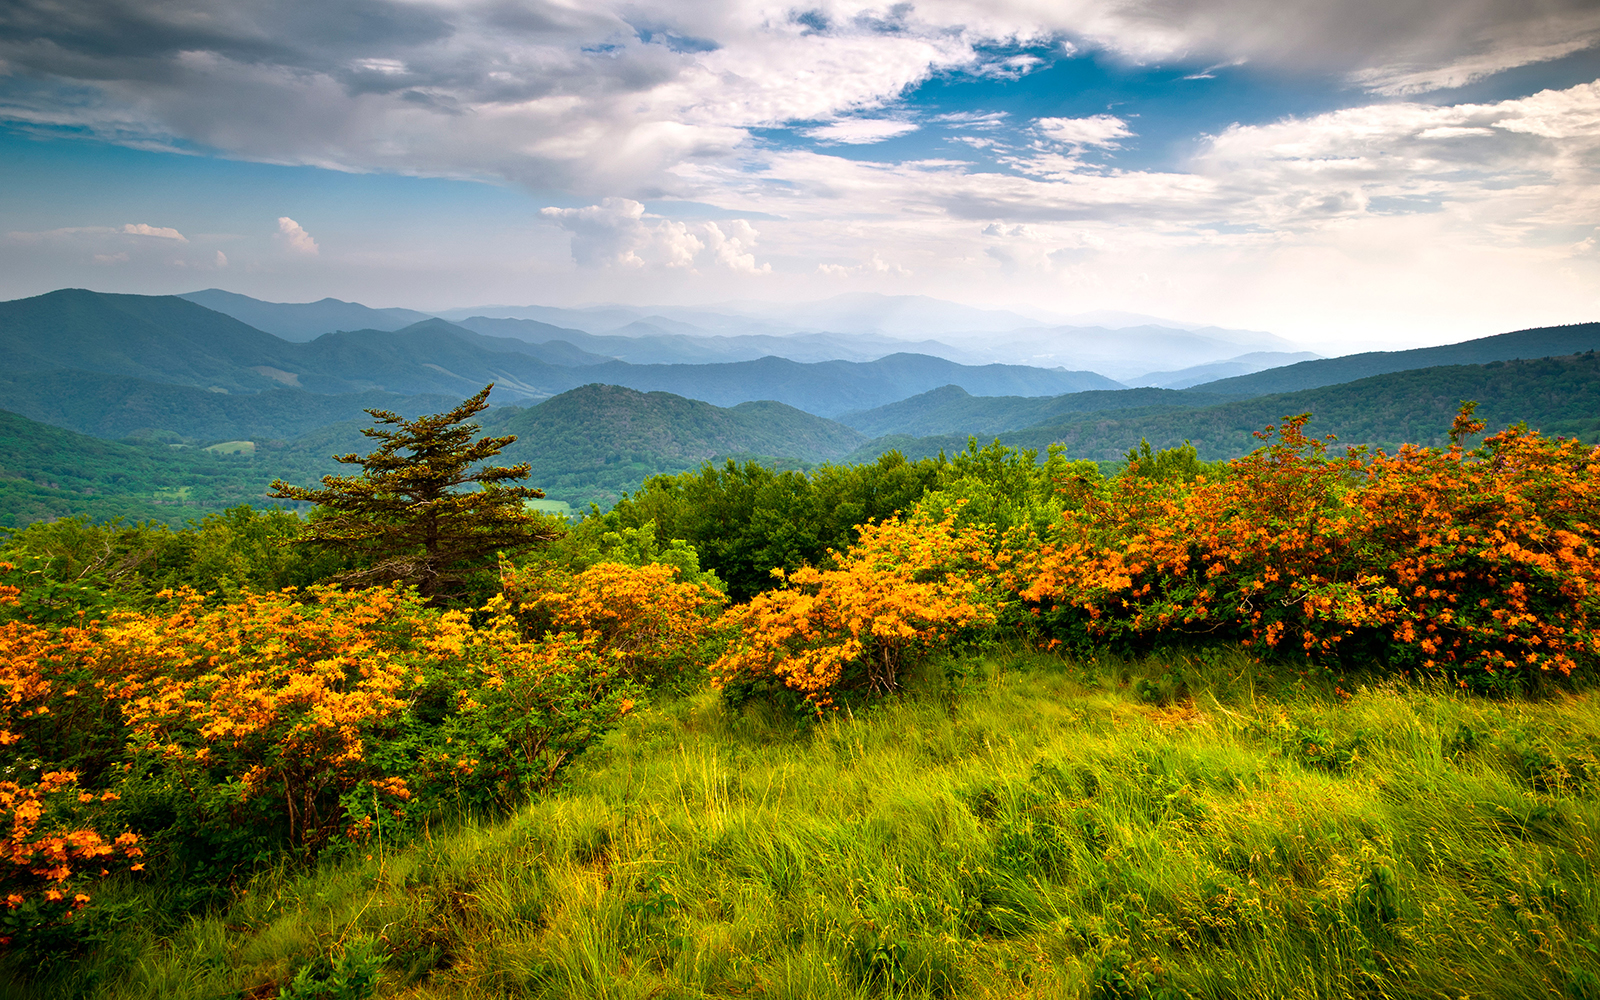 Scenic fall landscape with grassy field in front sloping down to trees and then a series of mountains going deep into the background with a beautiful sky above